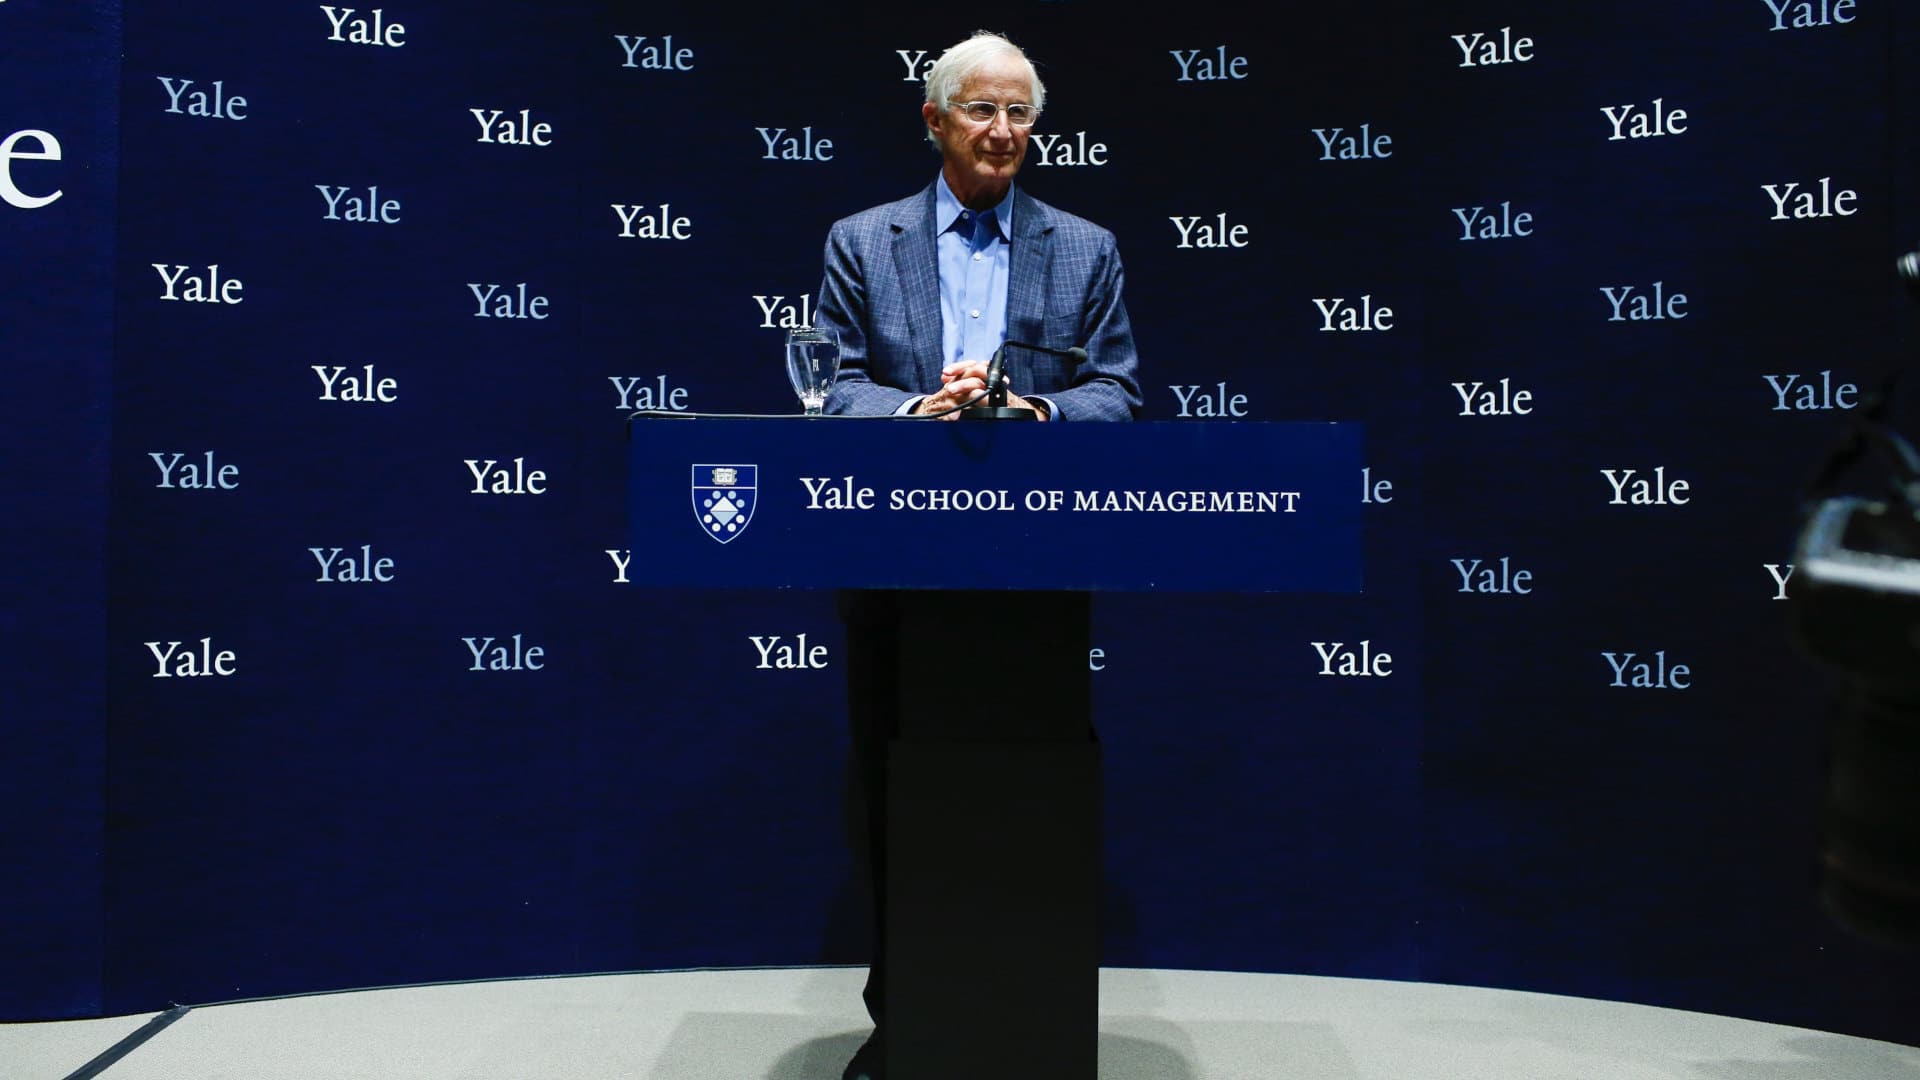 Yale Professor William Nordhaus speaks during a press conference after winning the 2018 Nobel Prize in Economic Sciences.